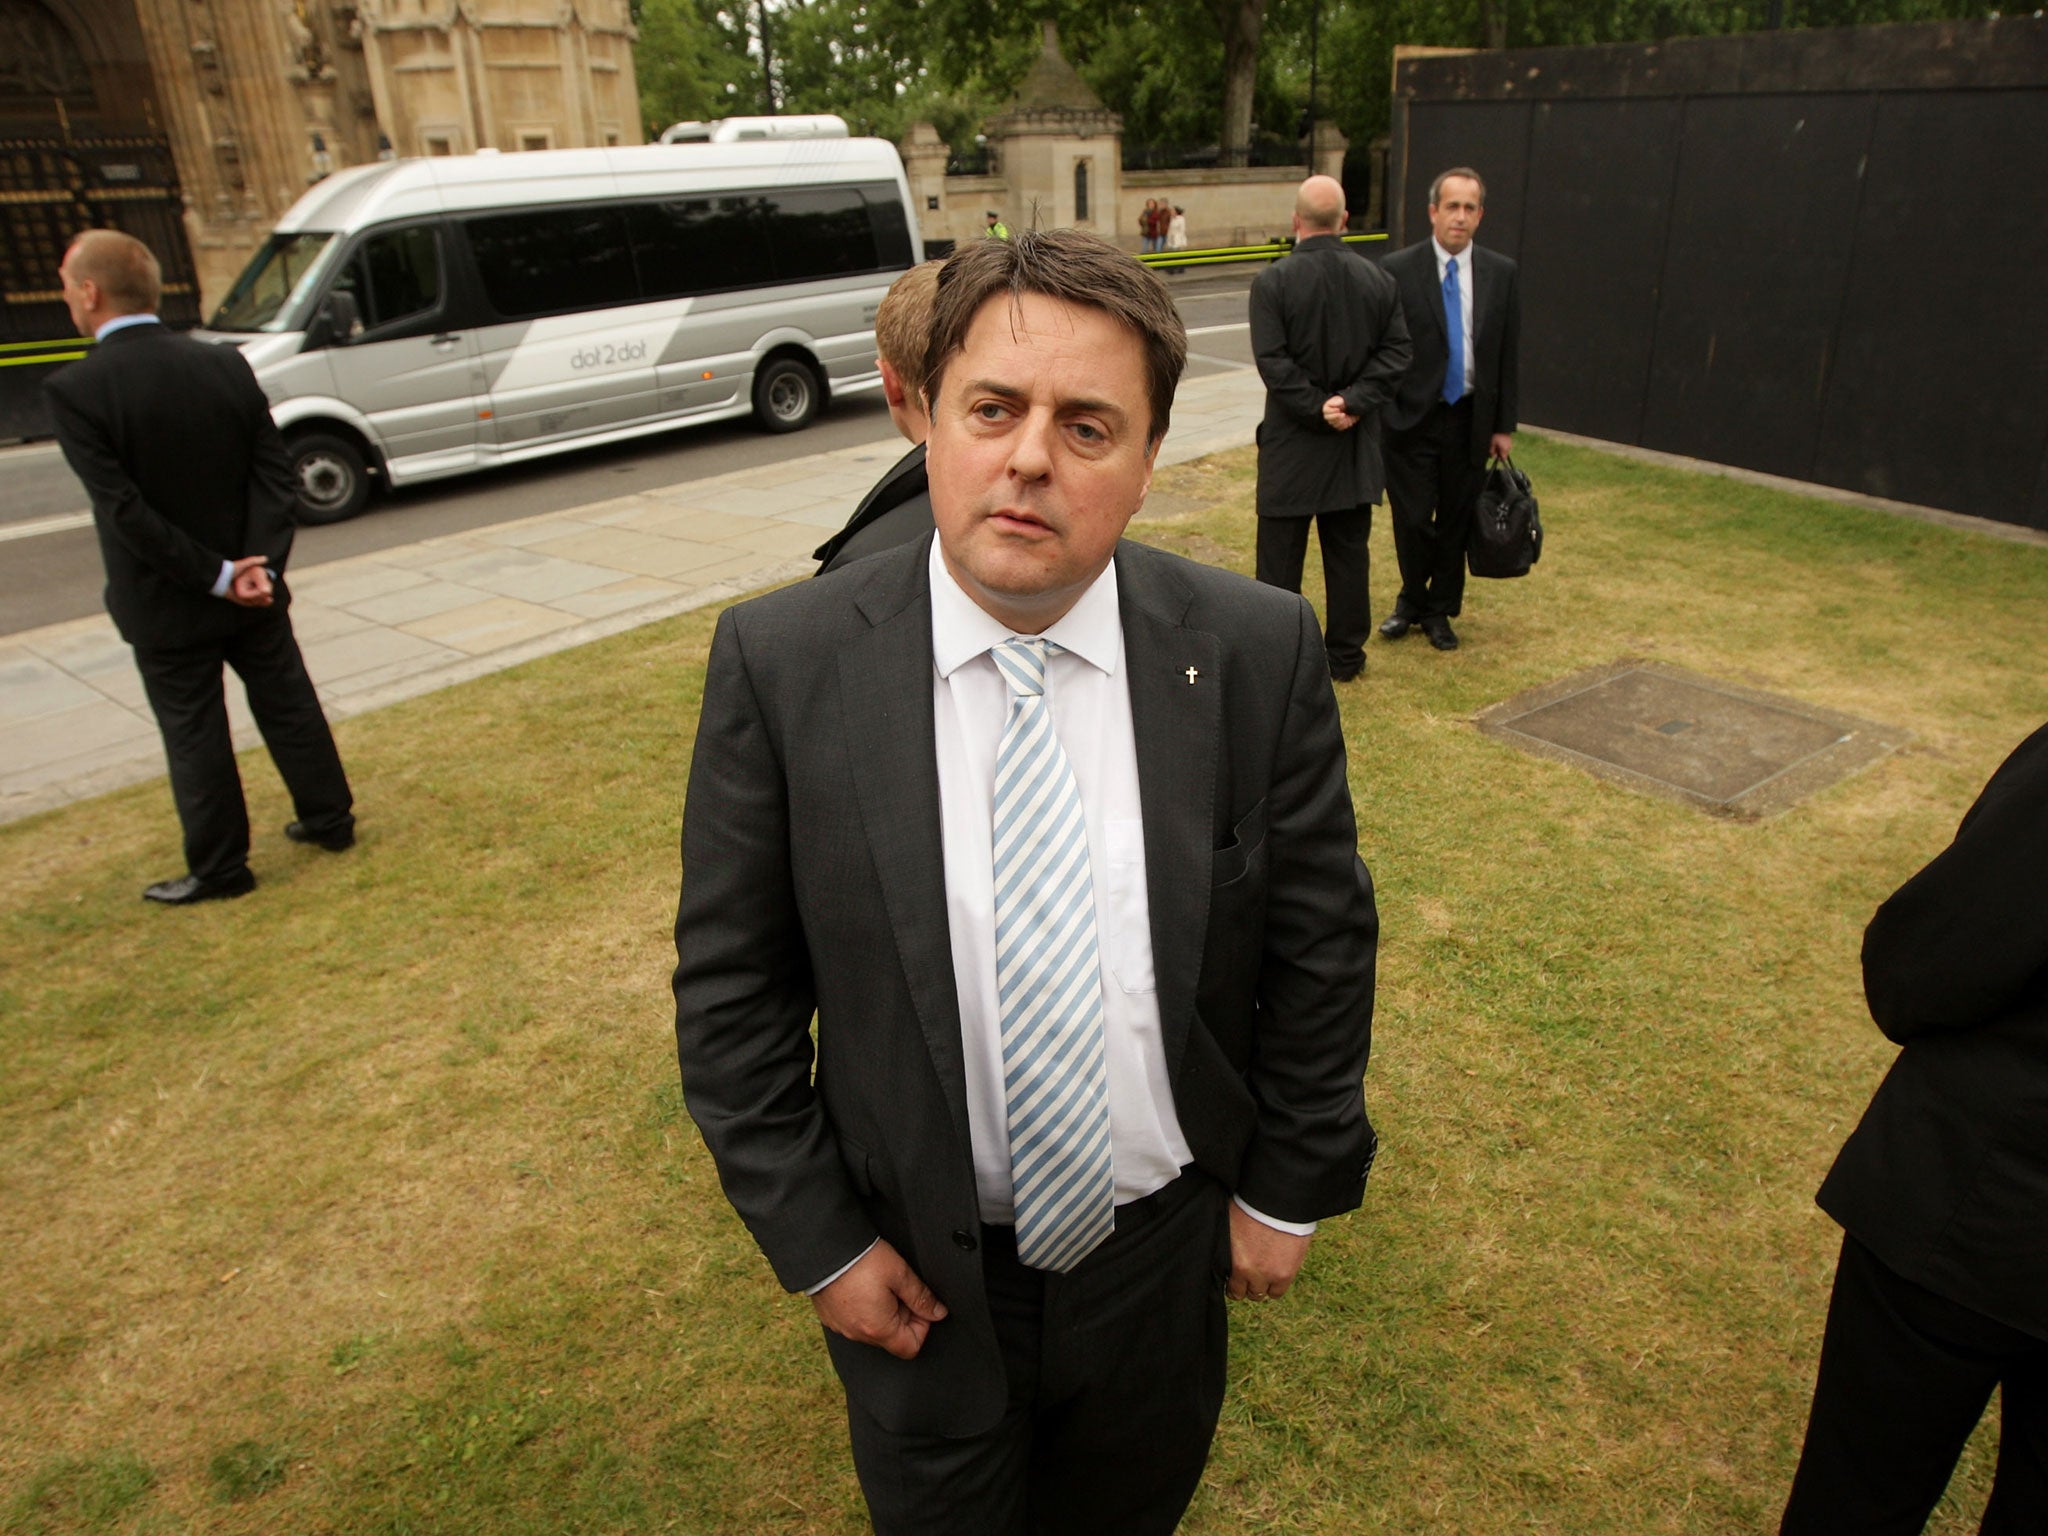 Nick Griffin lost his seat in Strasbourg as the BNP’s vote dropped to one per cent